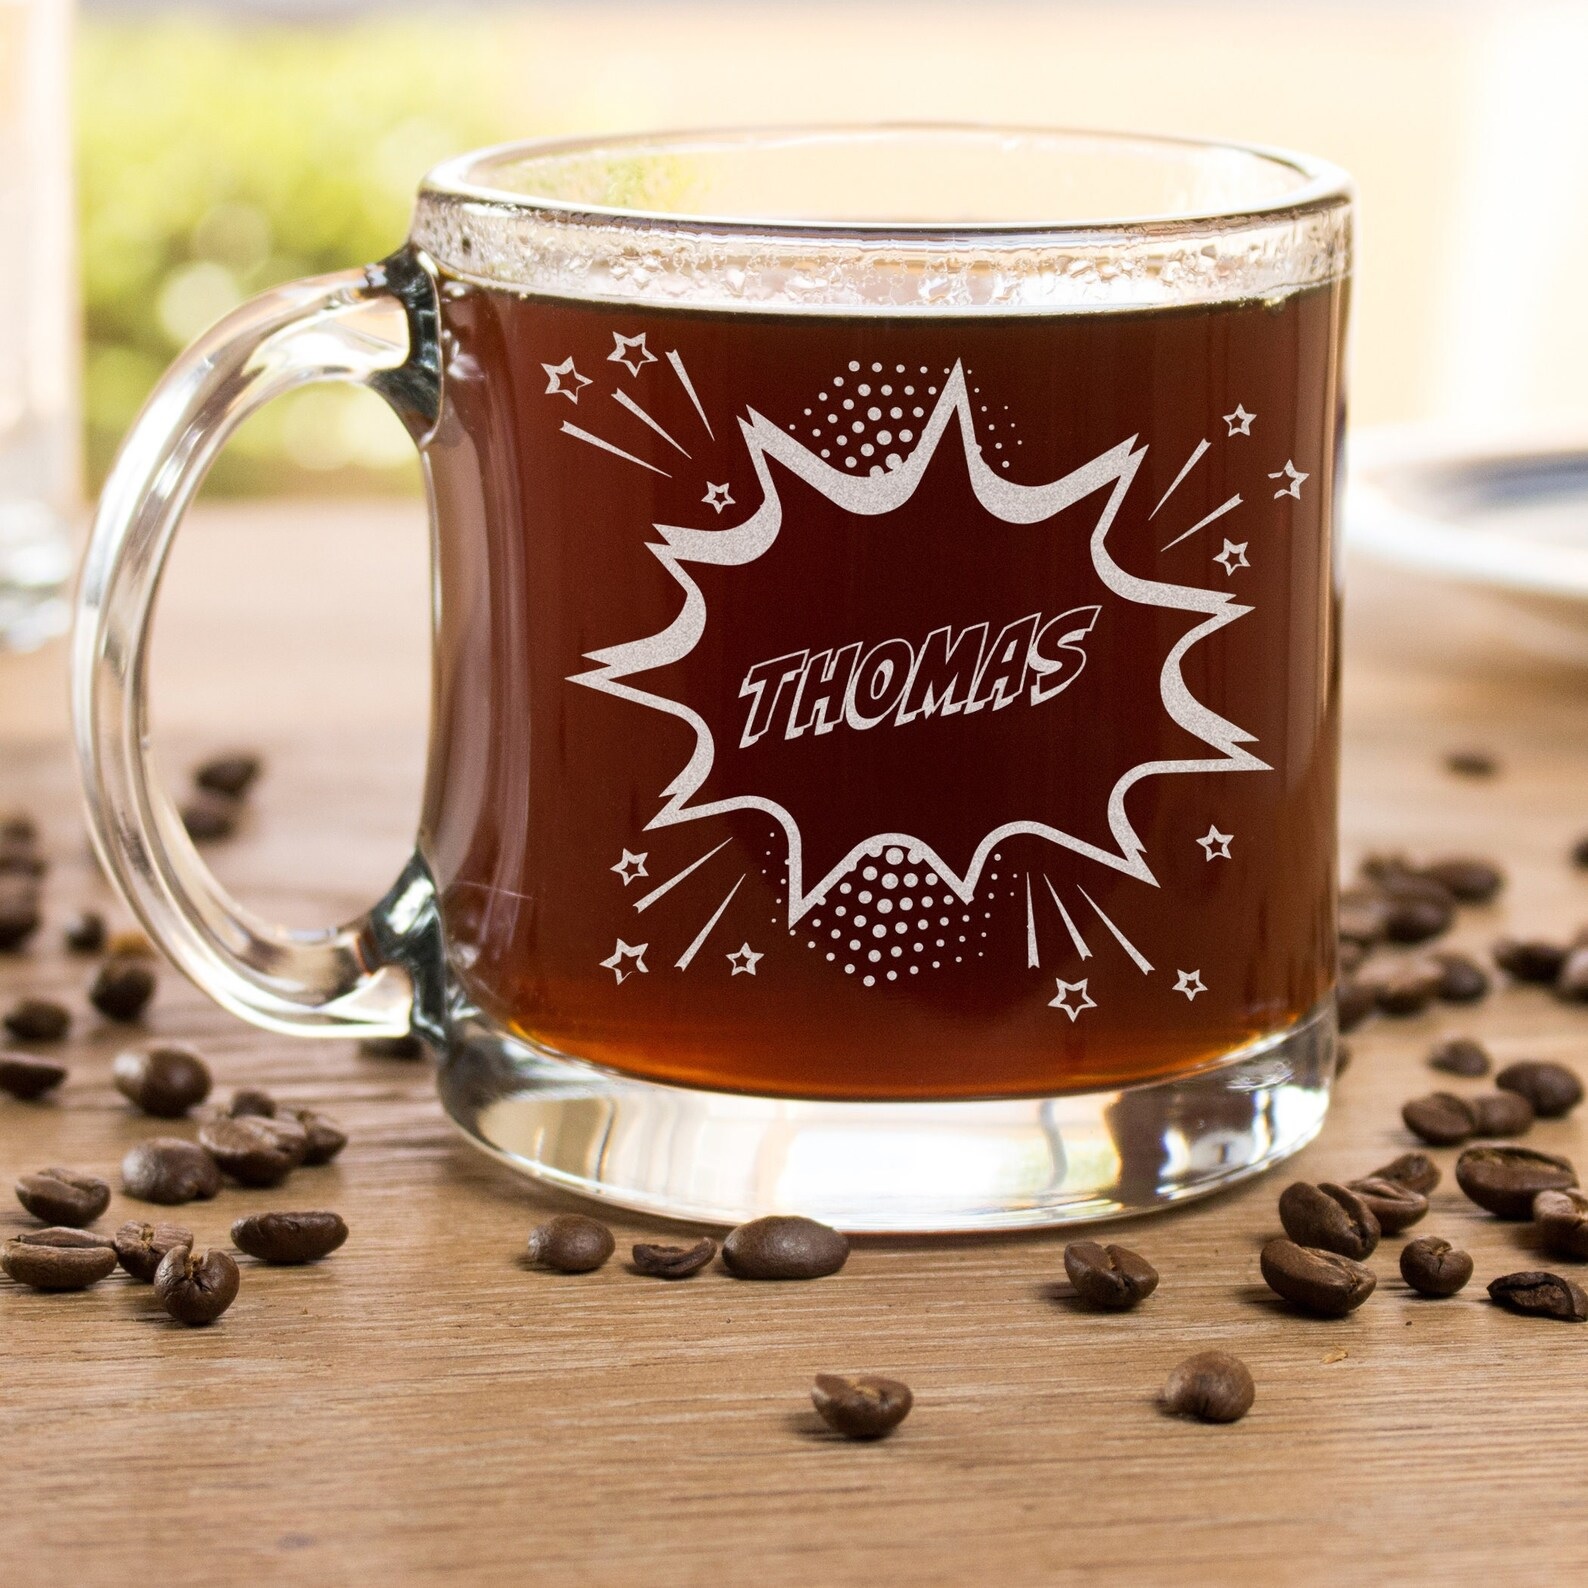 A glass coffee mug with a person's name inside a comics-style action bubble